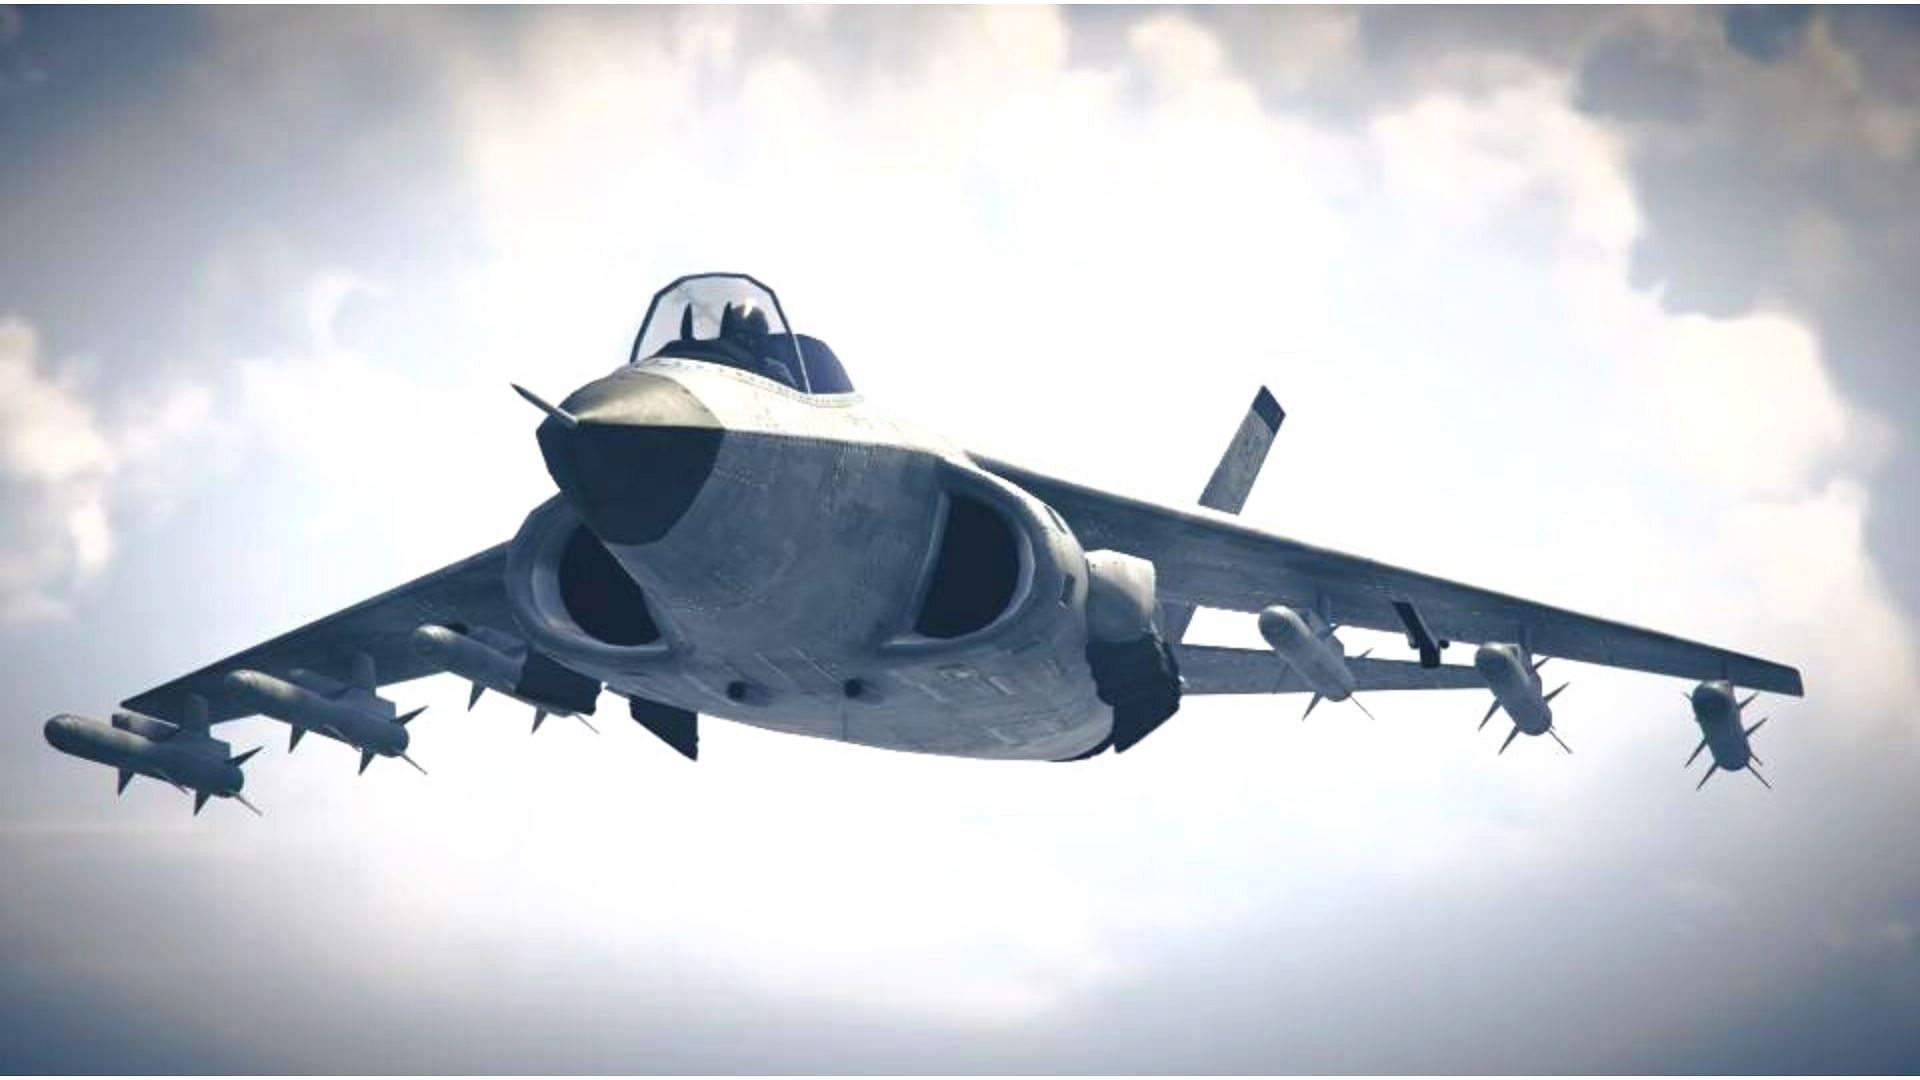 The Hydra can be foudn in both GTA: San Andreas and GTA Online (Image via Rockstar Games)